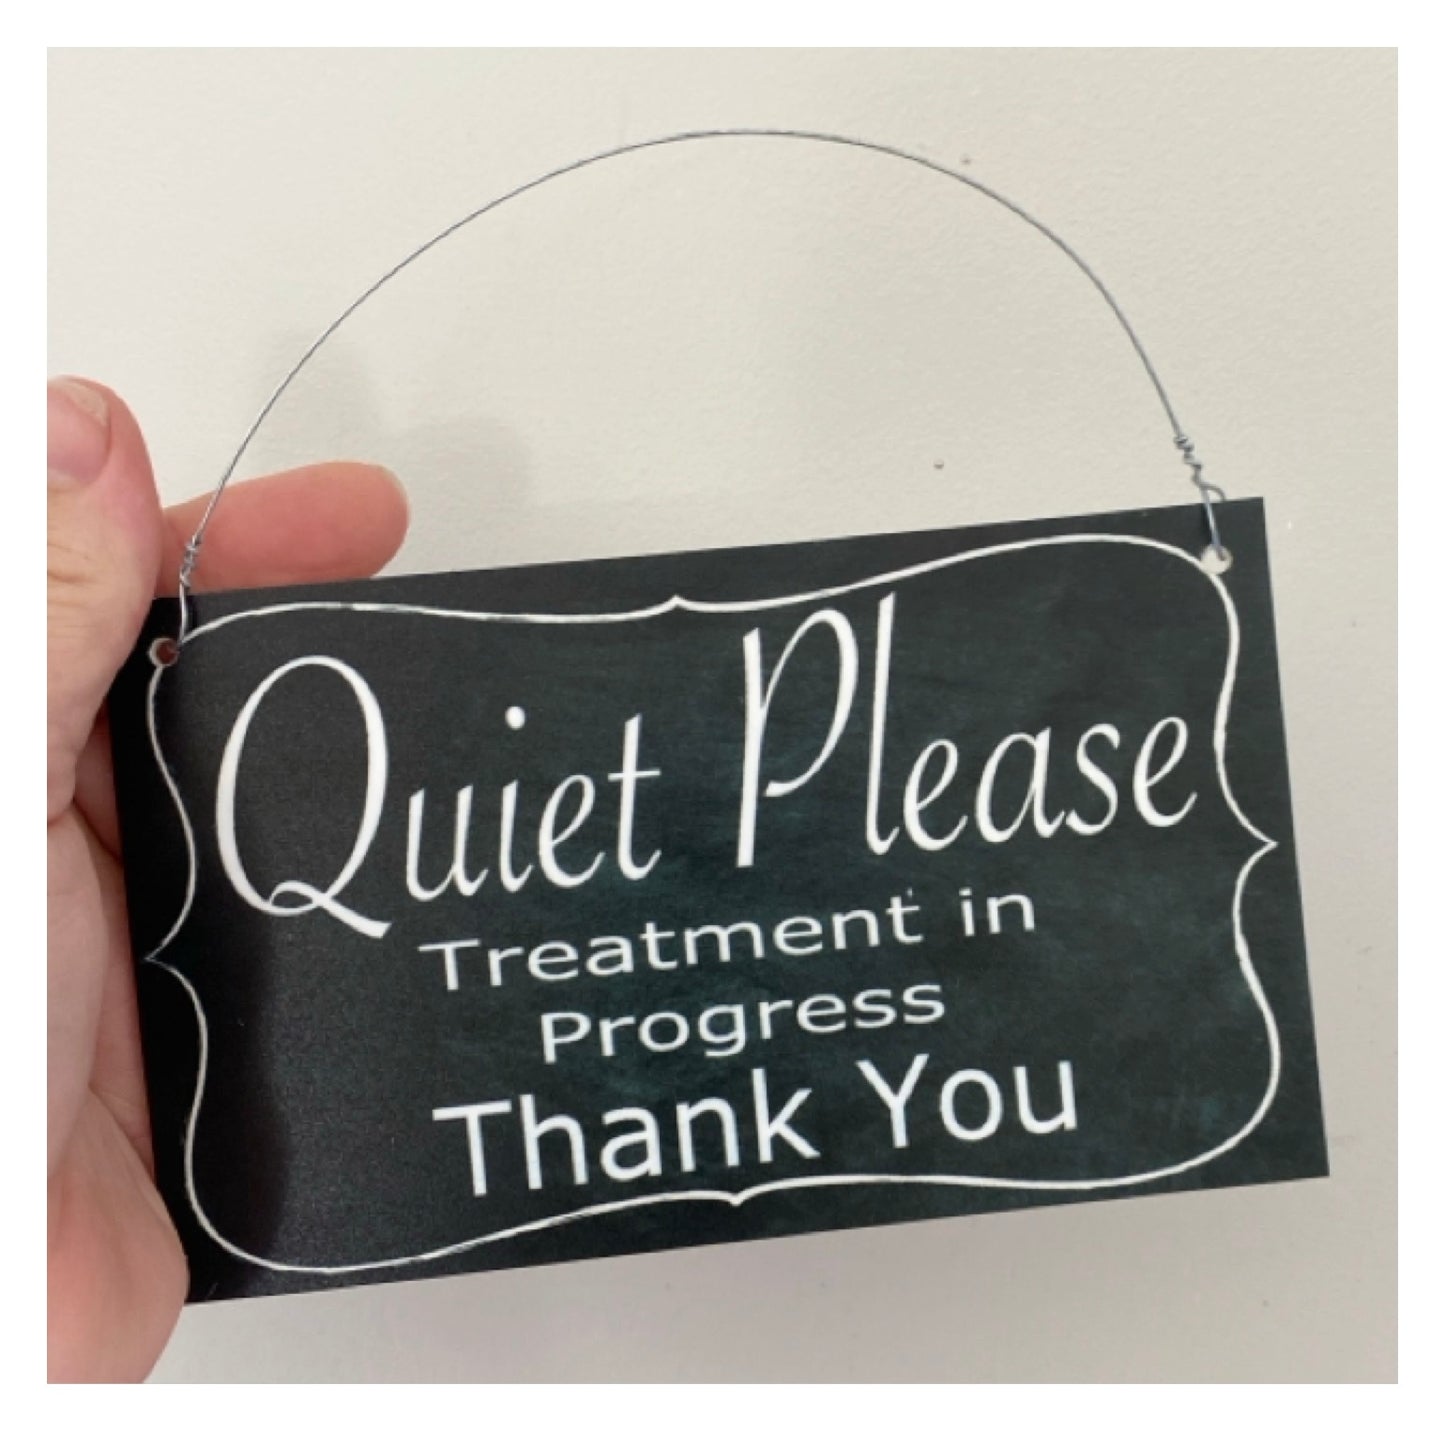 Quiet Please Clinic Treatment Massage Sign - The Renmy Store Homewares & Gifts 